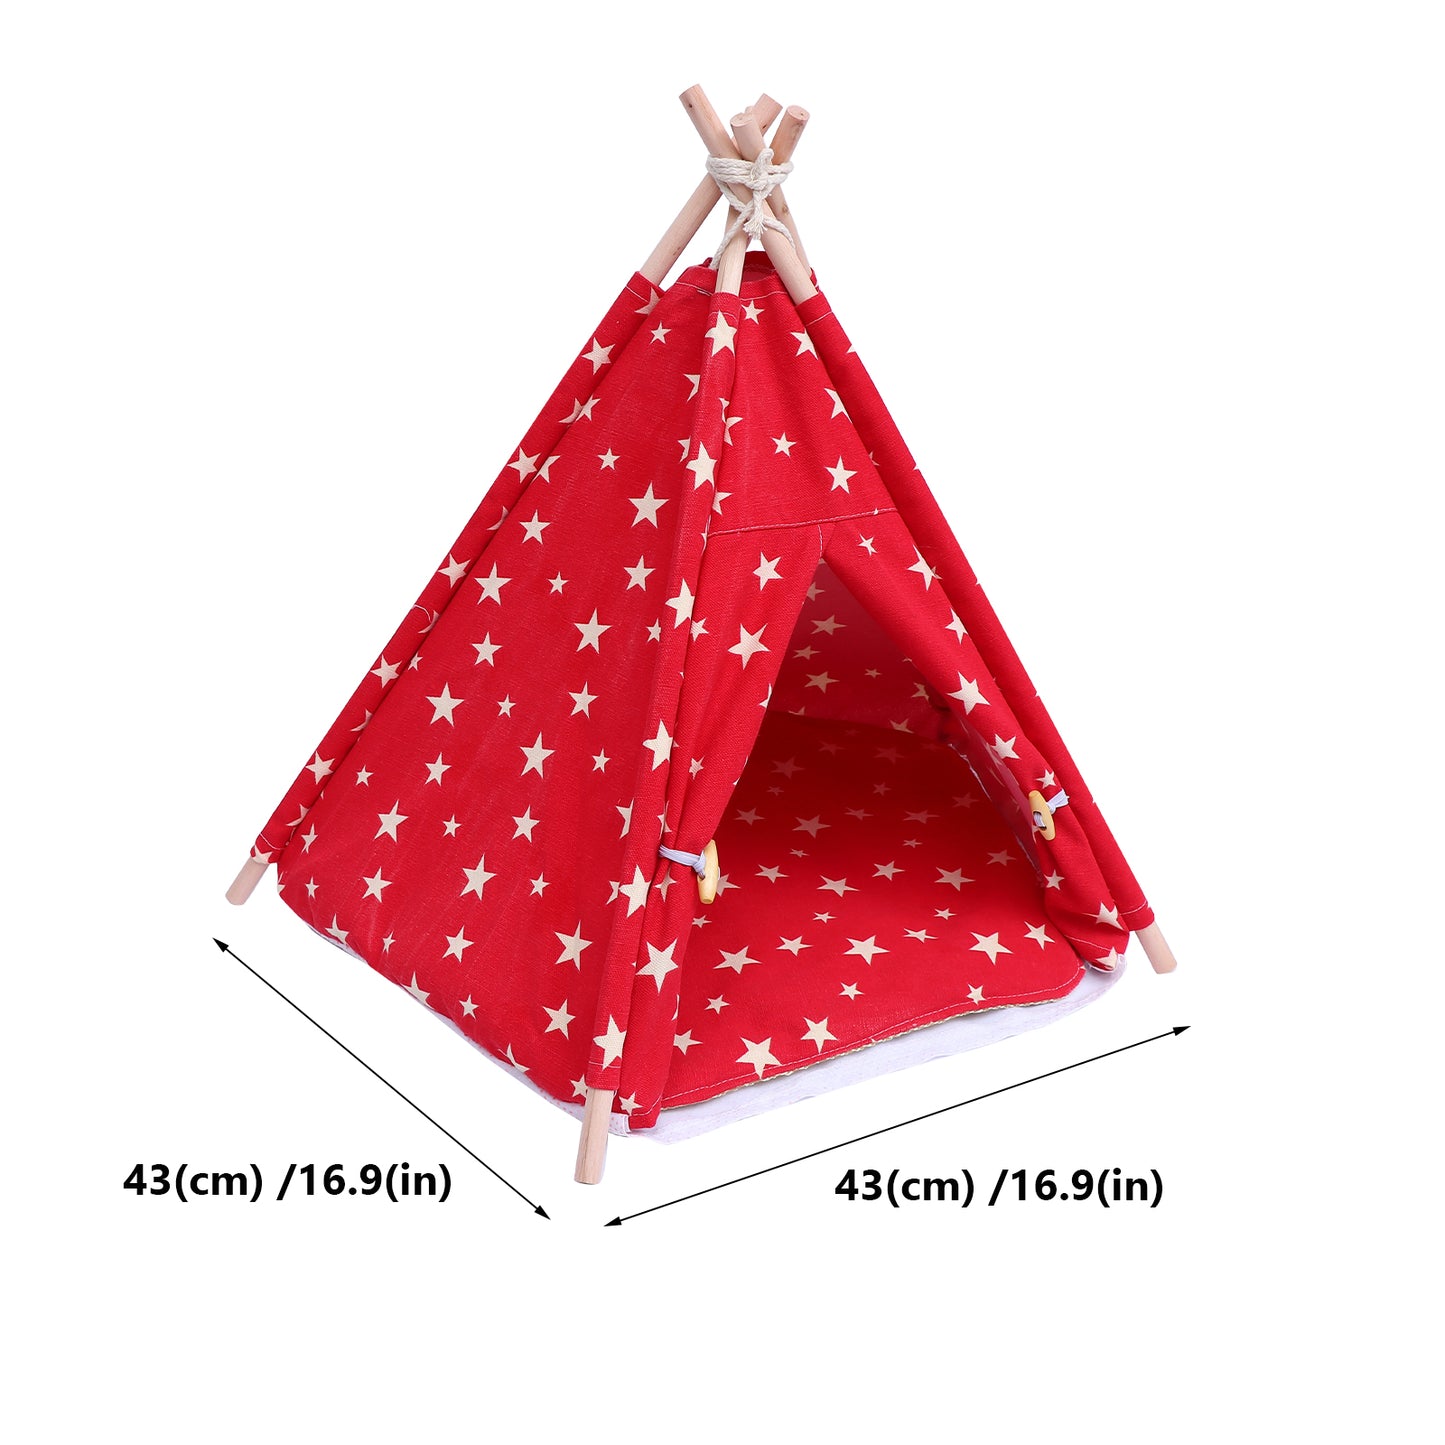 NUOLUX 1Pc Pet Teepee Dog Kennel Pet Tent Pet Supplies Cat Bed House Home Decor Animals & Pet Supplies > Pet Supplies > Dog Supplies > Dog Houses NUOLUX   